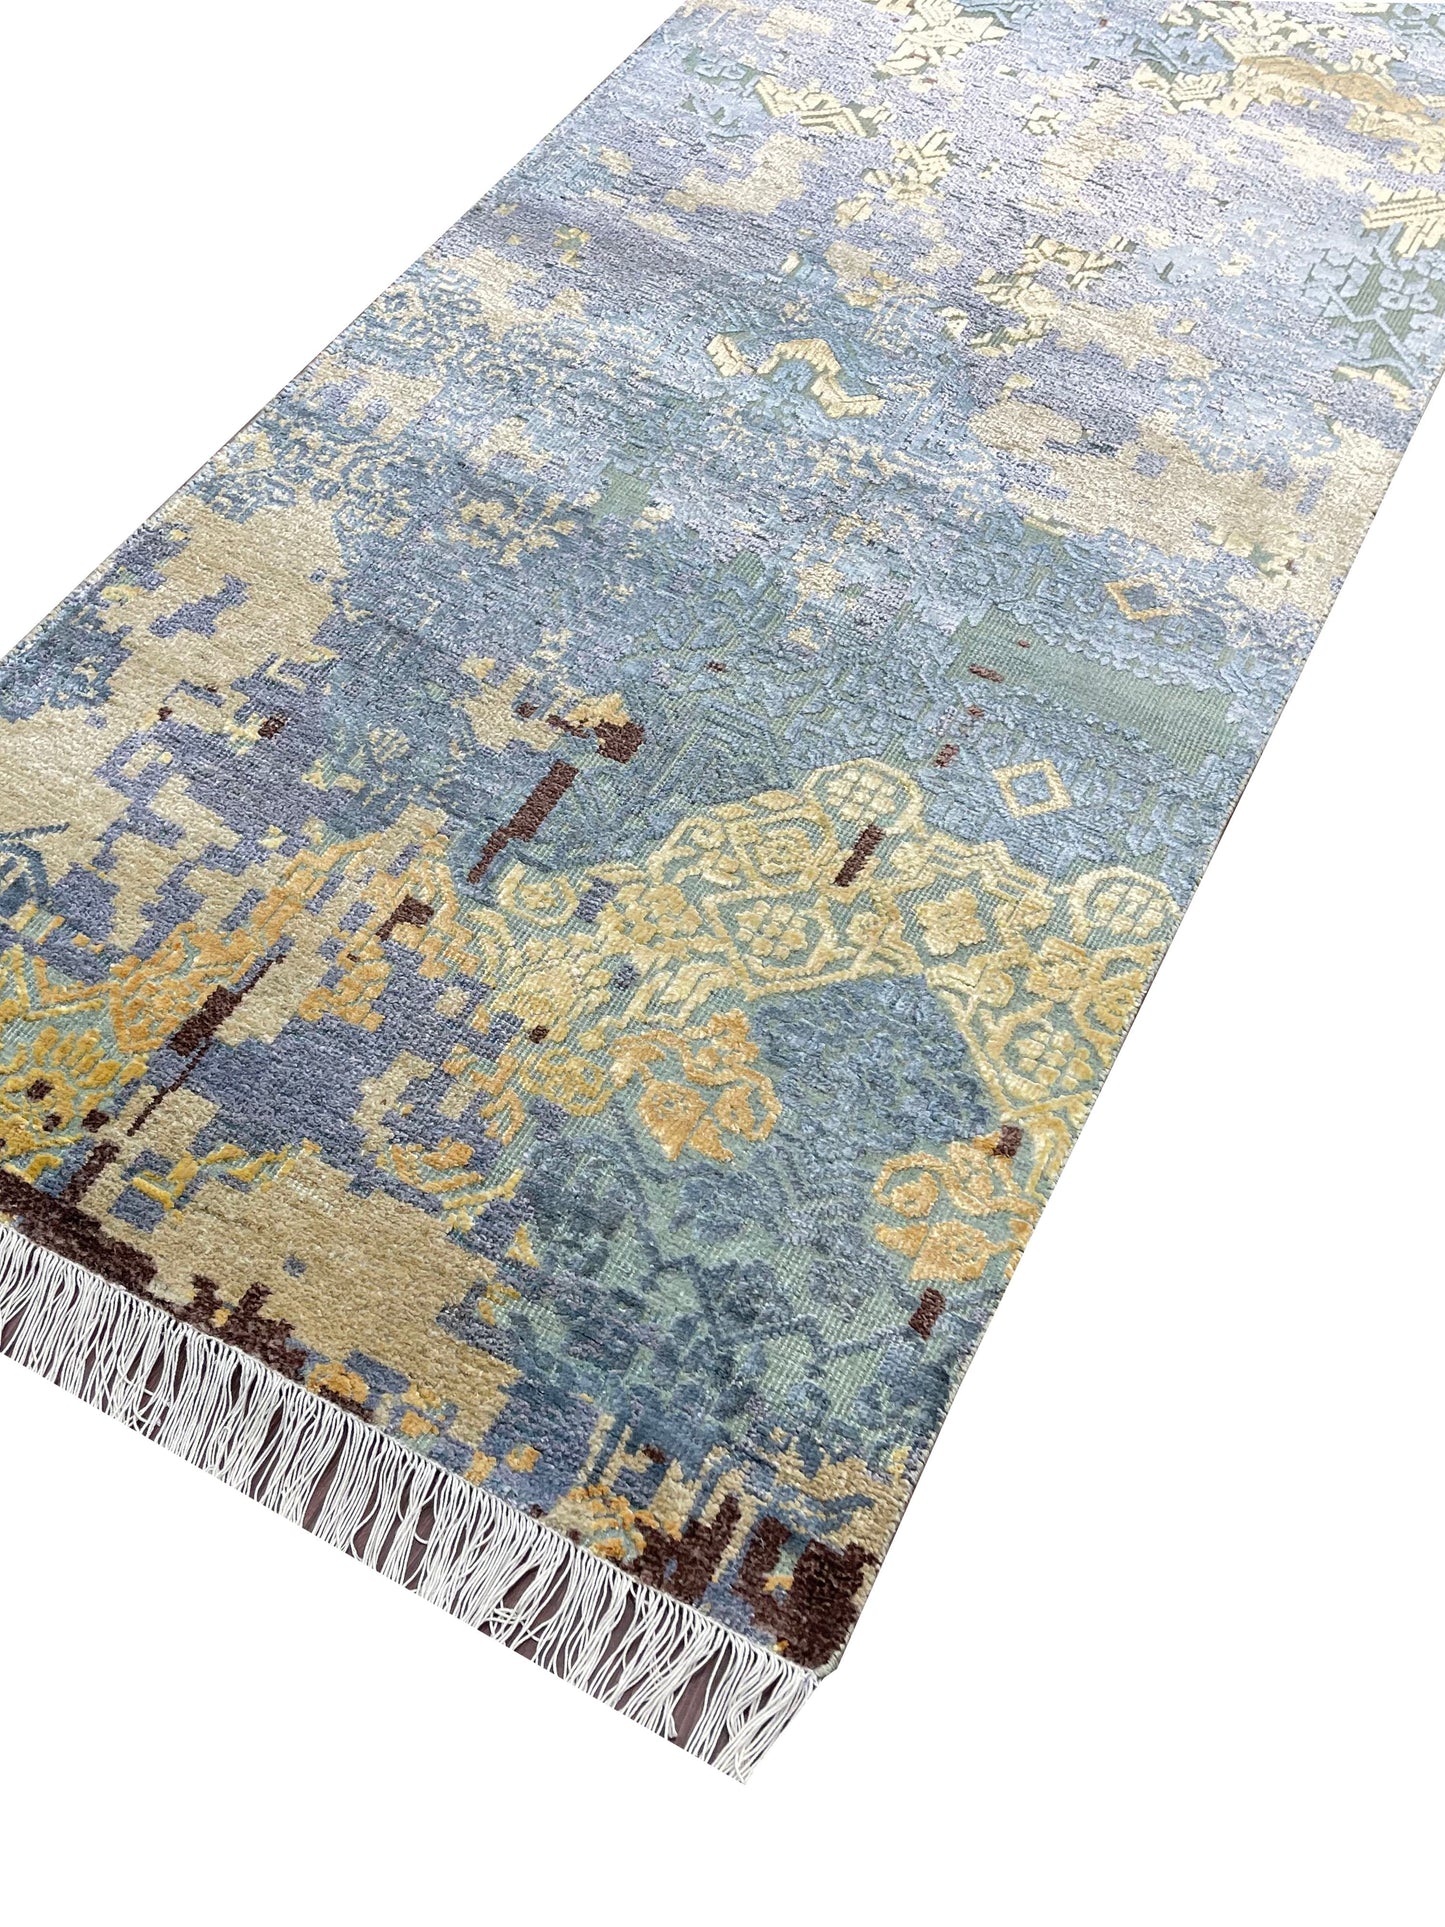 Get trendy with Contemporary Handknotted Runner Rug Ivory and Blue 2.5X13.9ft 74X417cms - Runner Rugs available at Jaipur Oriental Rugs. Grab yours for $1795.00 today!